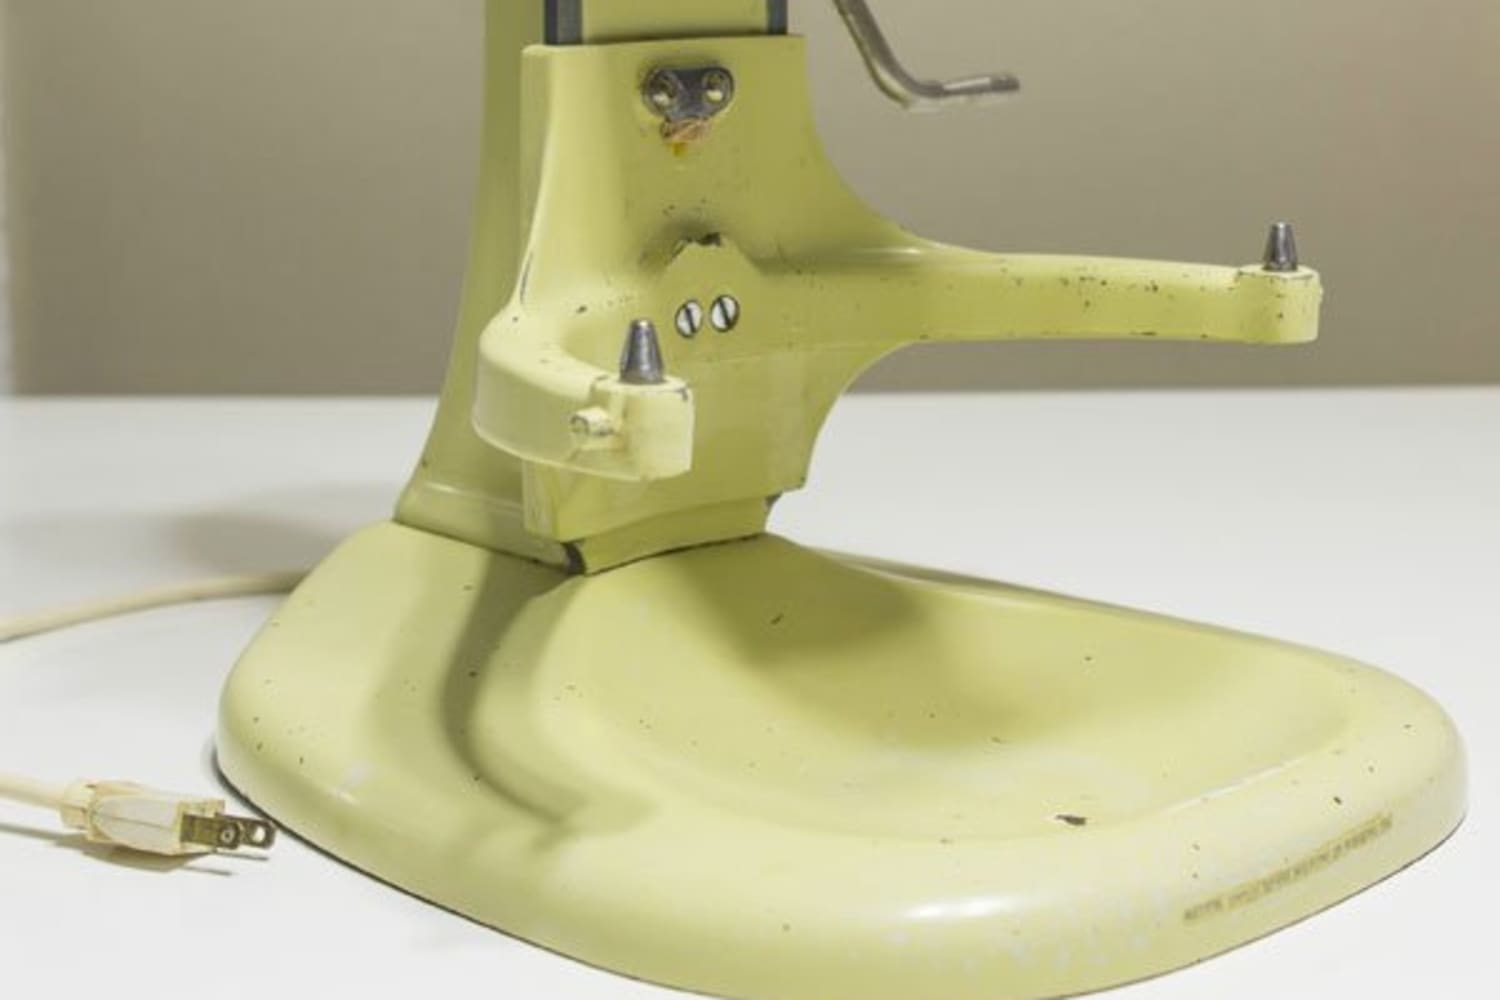 How One Guy Restored This Vintage KitchenAid Mixer